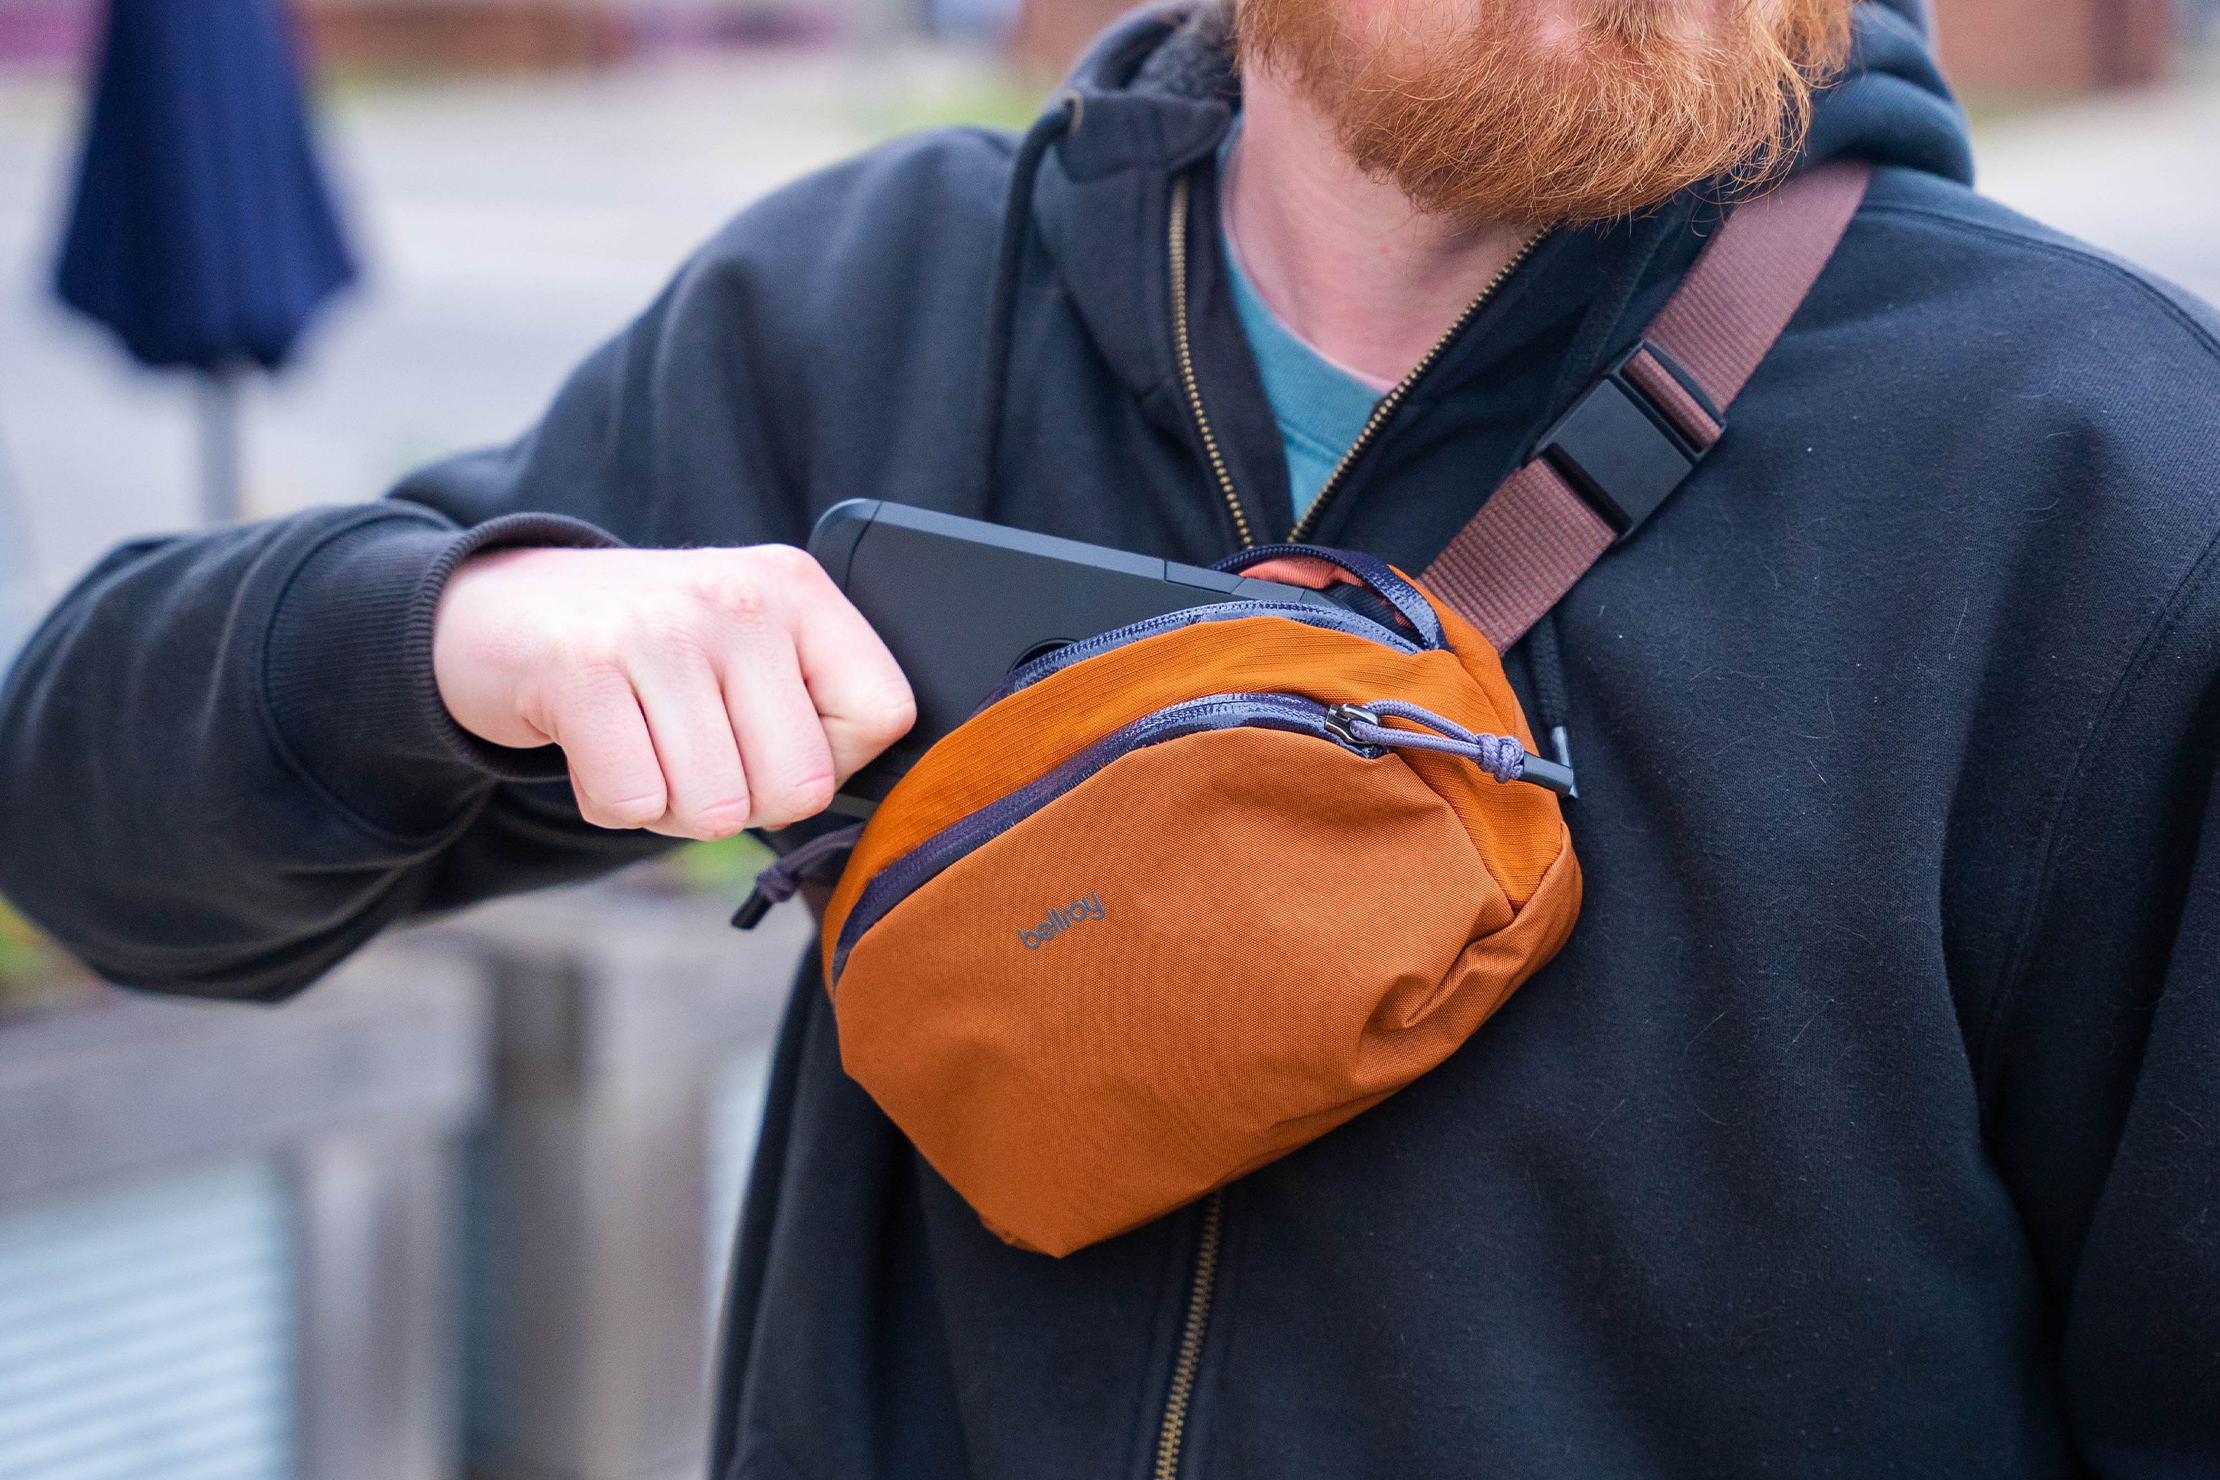 Bellroy Venture Hip Pack In Use